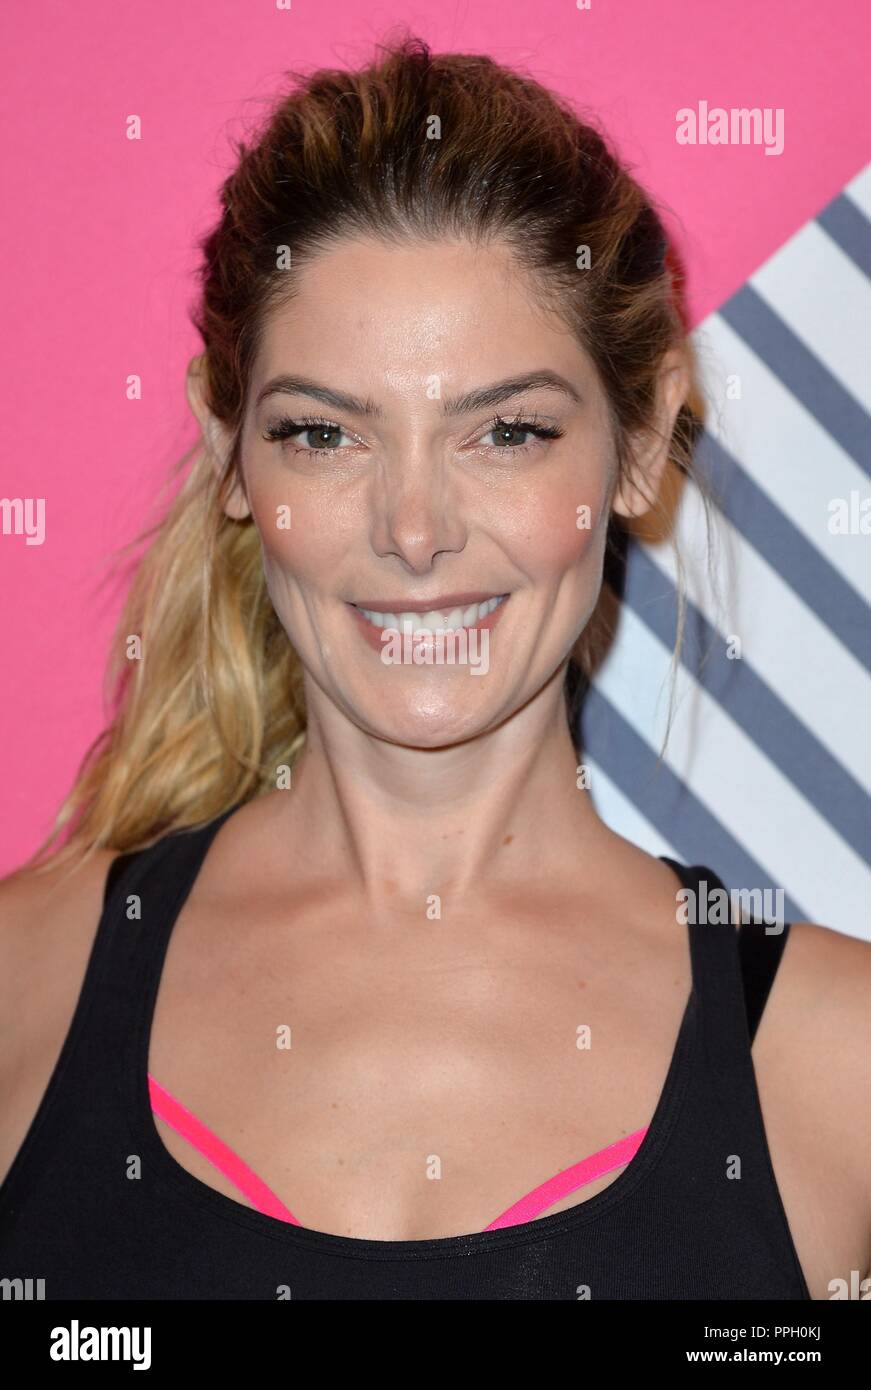 New York, NY, USA. 25th Sep, 2018. Ashley Greene at arrivals for STRONG by ZUMBA 2nd Year Anniversary Celebration, Milk Studios, New York, NY September 25, 2018. Credit: Kristin Callahan/Everett Collection/Alamy Live News Stock Photo